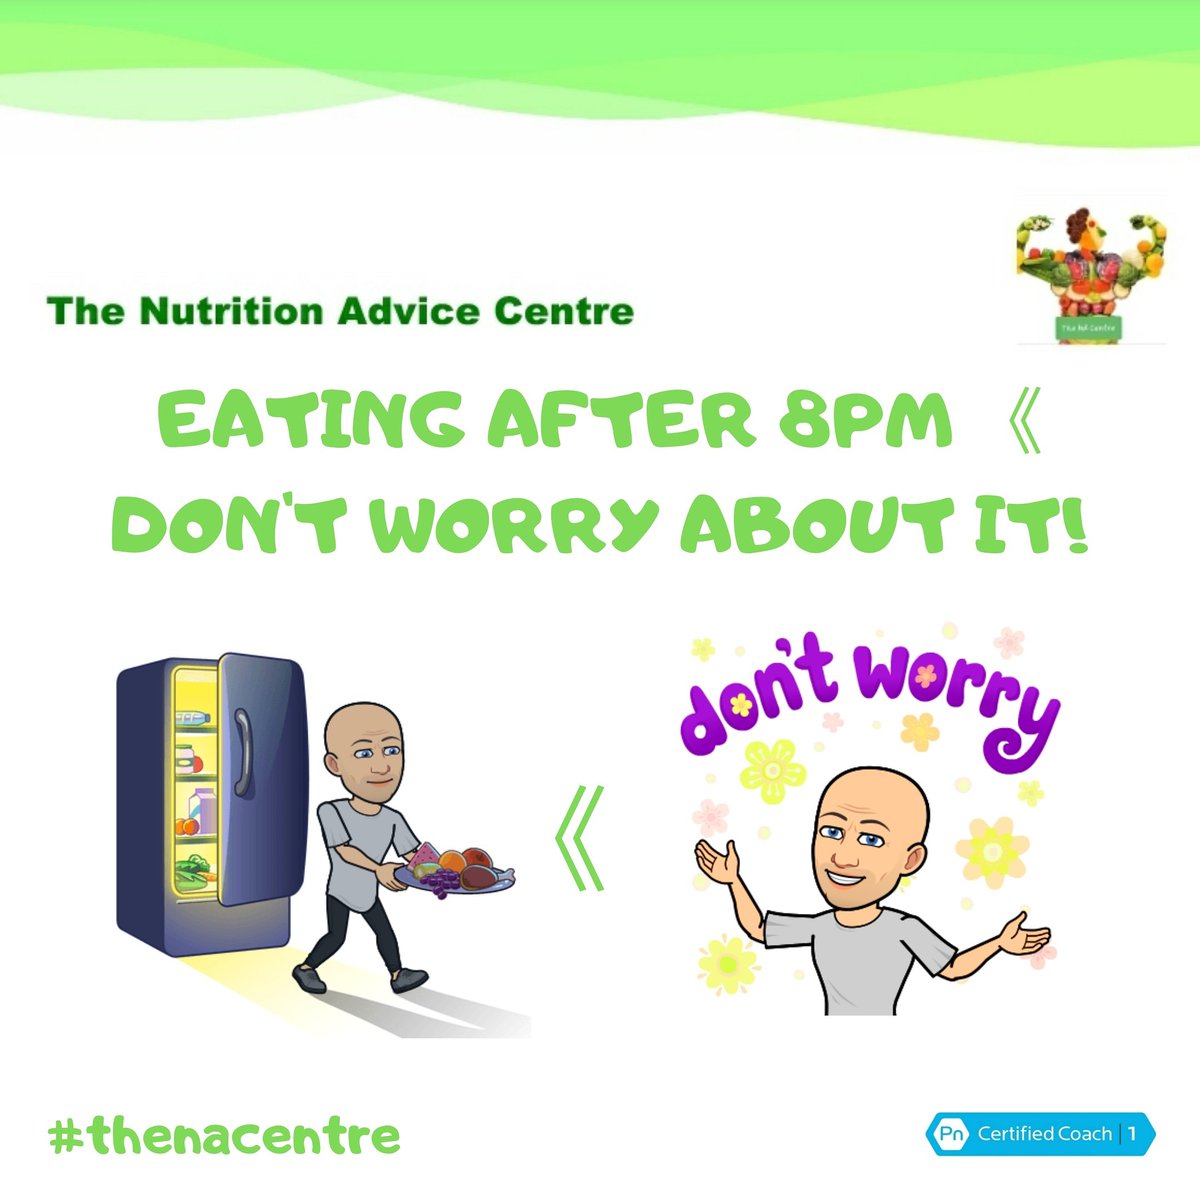 One of the...
#thenacentre #nutrition #weightloss #healthy #fitness #hydration #food #wholefoods #calories #snacks #snackgoals #eating #healthyeating #vegan #gym #gymmotivation #instafit #instafitness #fitnessgoals #gym #FitnessMotivation #personaltrainer
instagram.com/p/CCQC6Ztju-g/…